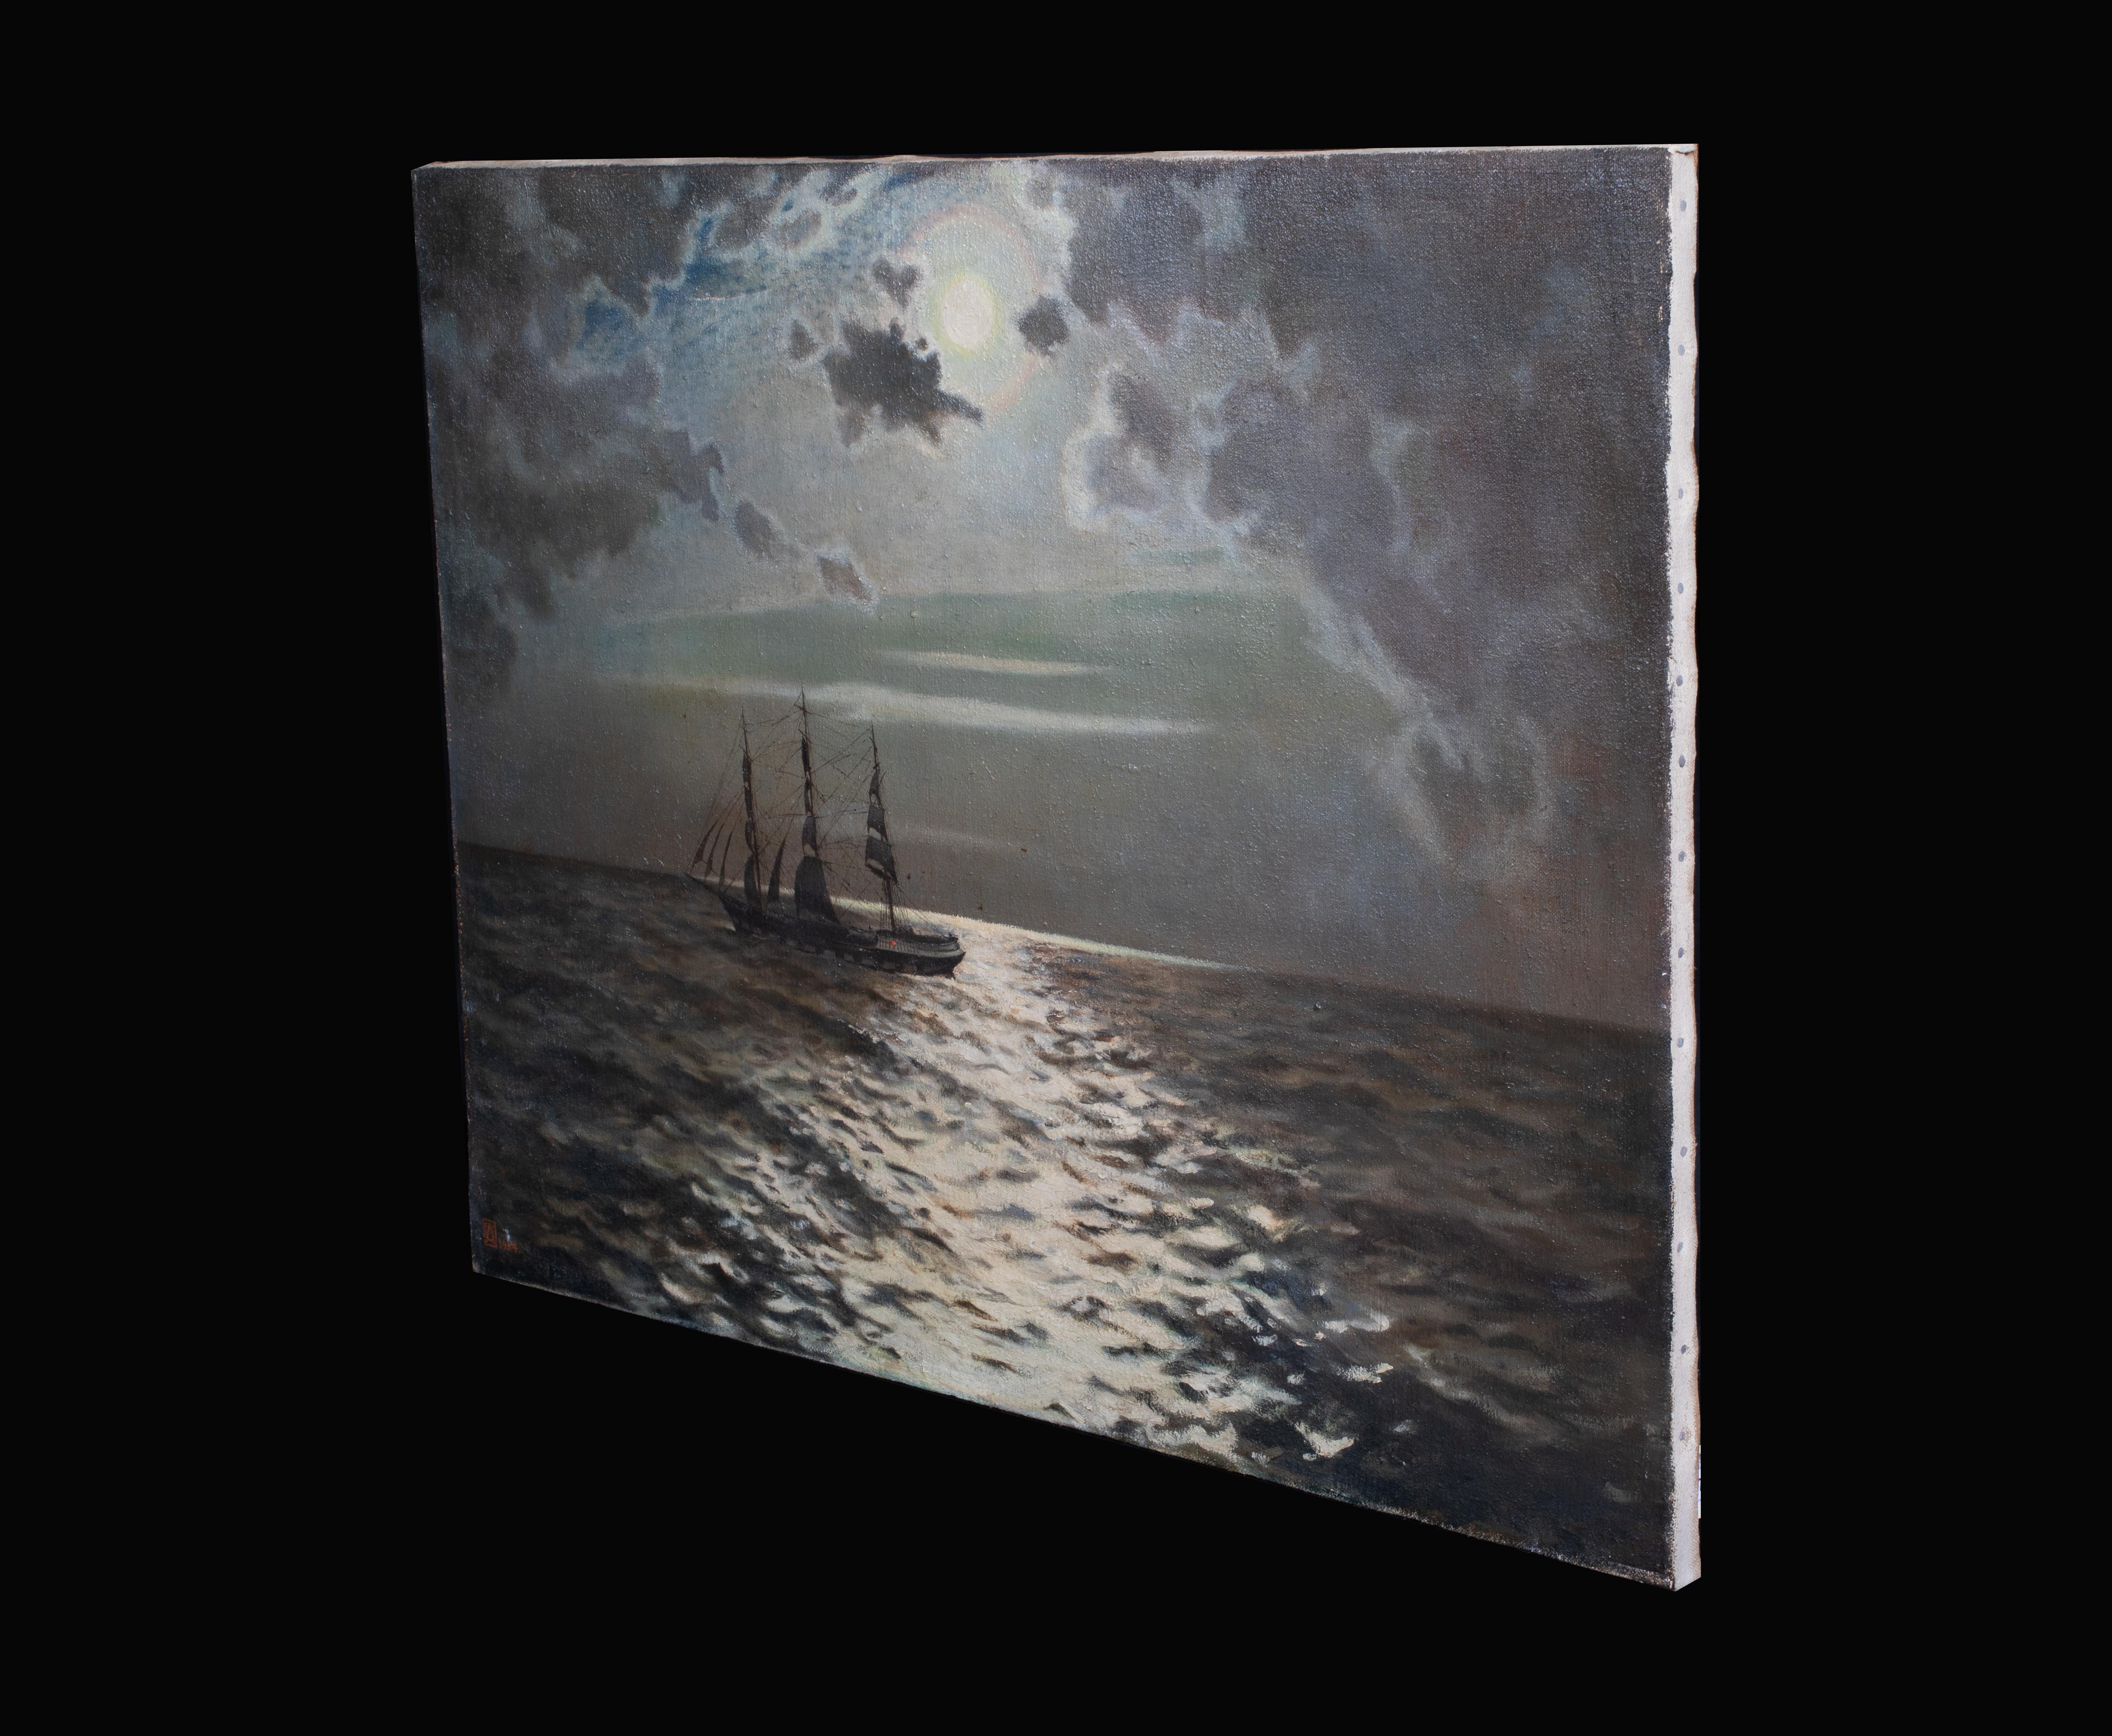 Ship Sailing In The Moonlight

Monogrammed indistinctly - FA? - dates 1924

Large 1924 British School moonlit coastal scene of a ship wailing at night on calm waters, oil on canvas signed. Superb quality and good condition with one scuff. Singed and